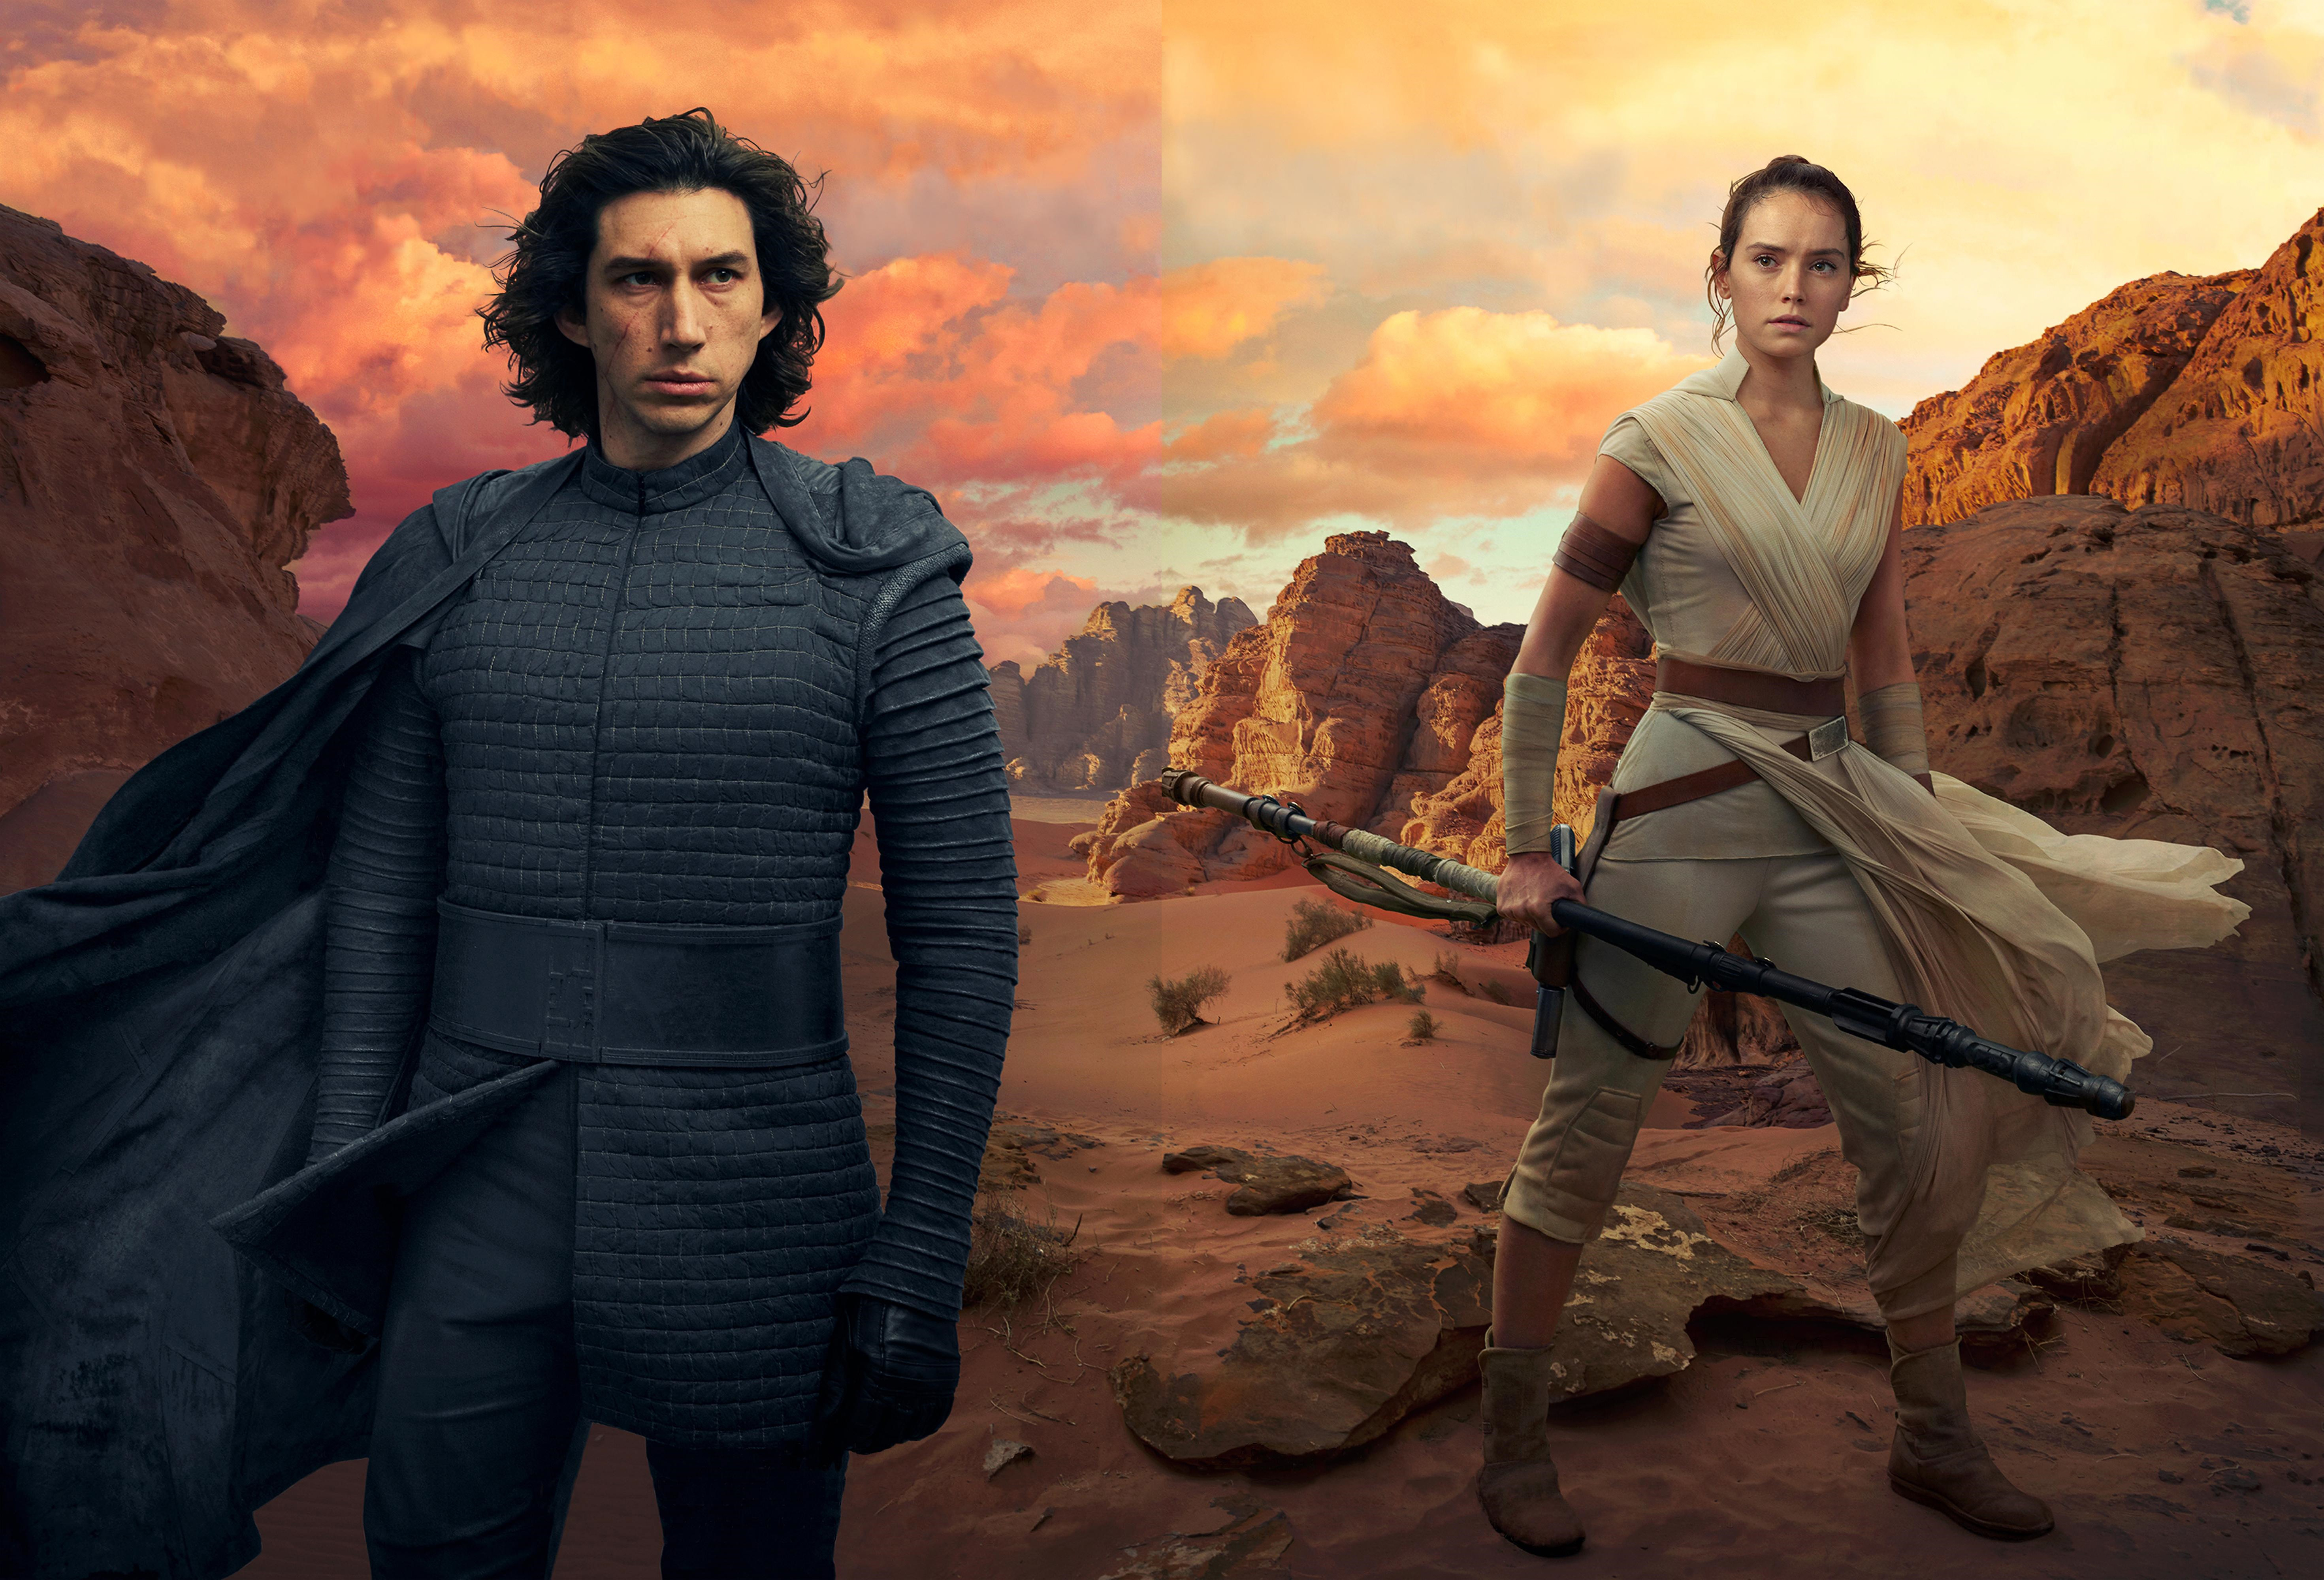 2048x2048 Kylo Ren And Rey In Star Wars The Rise Of Skywalker Ipad Air Wallpaper Hd Movies 4k Wallpapers Images Photos And Background